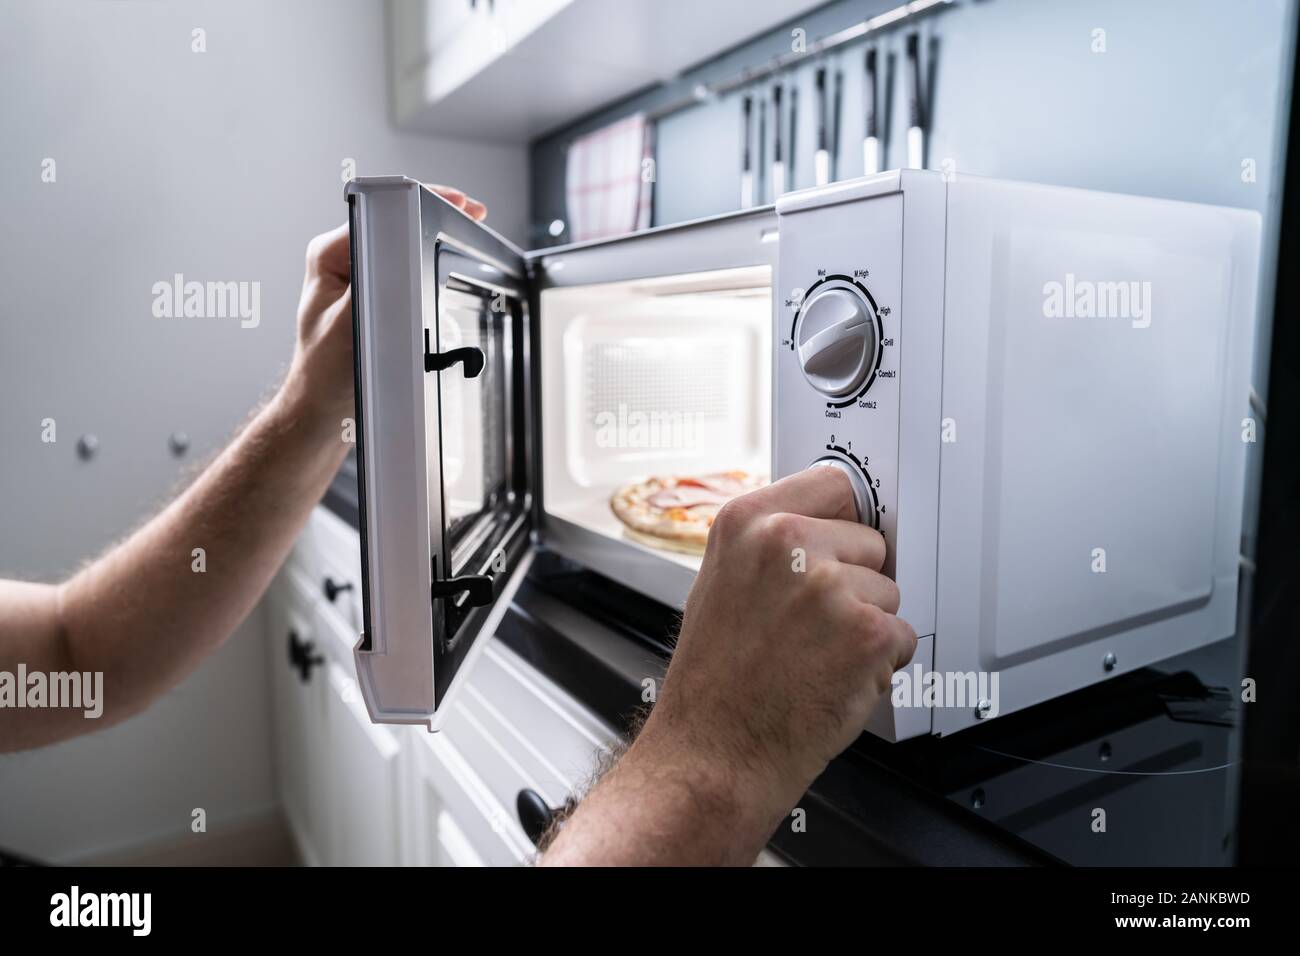 Human Hand Baking Pizza In Microwave Oven Stock Photo